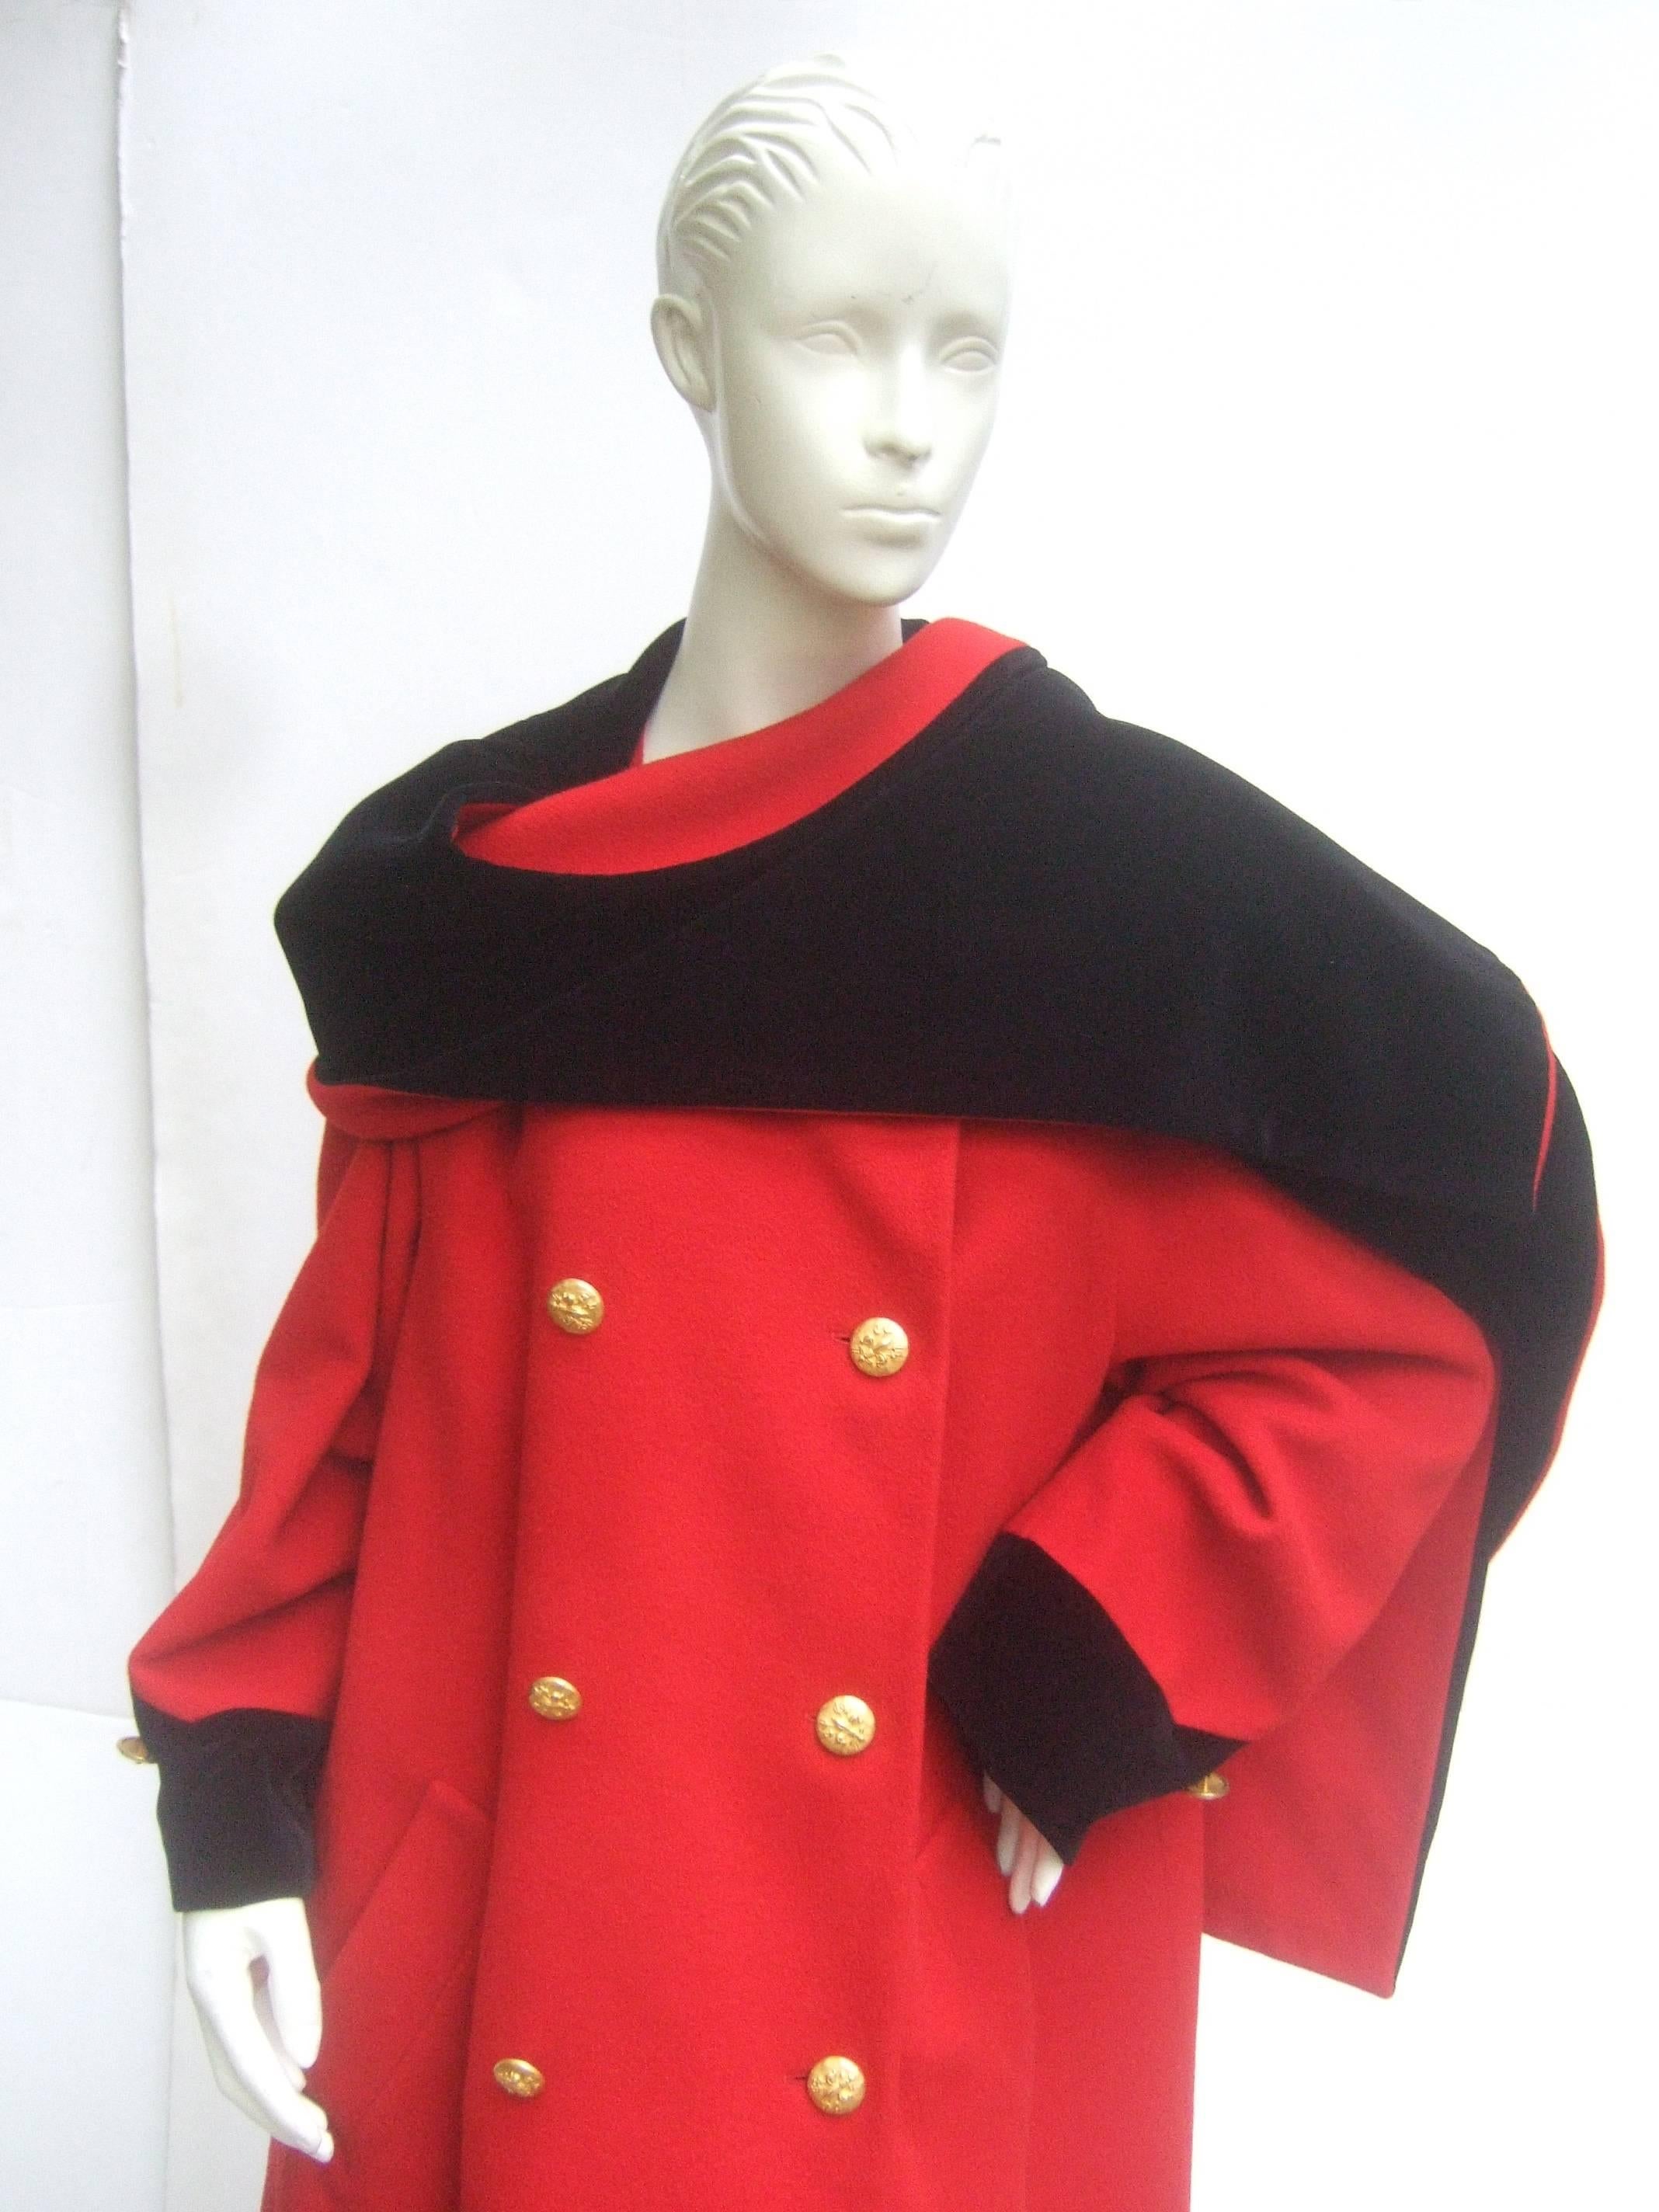 Escada Cherry red wool black velvet trim coat c 1990
The classic military style coat is designed with 
a long dramatic built in black velvet collar scarf 

The sleeve cuffs are accented with black velvet 
trim. Adorned with gilt metal insignia